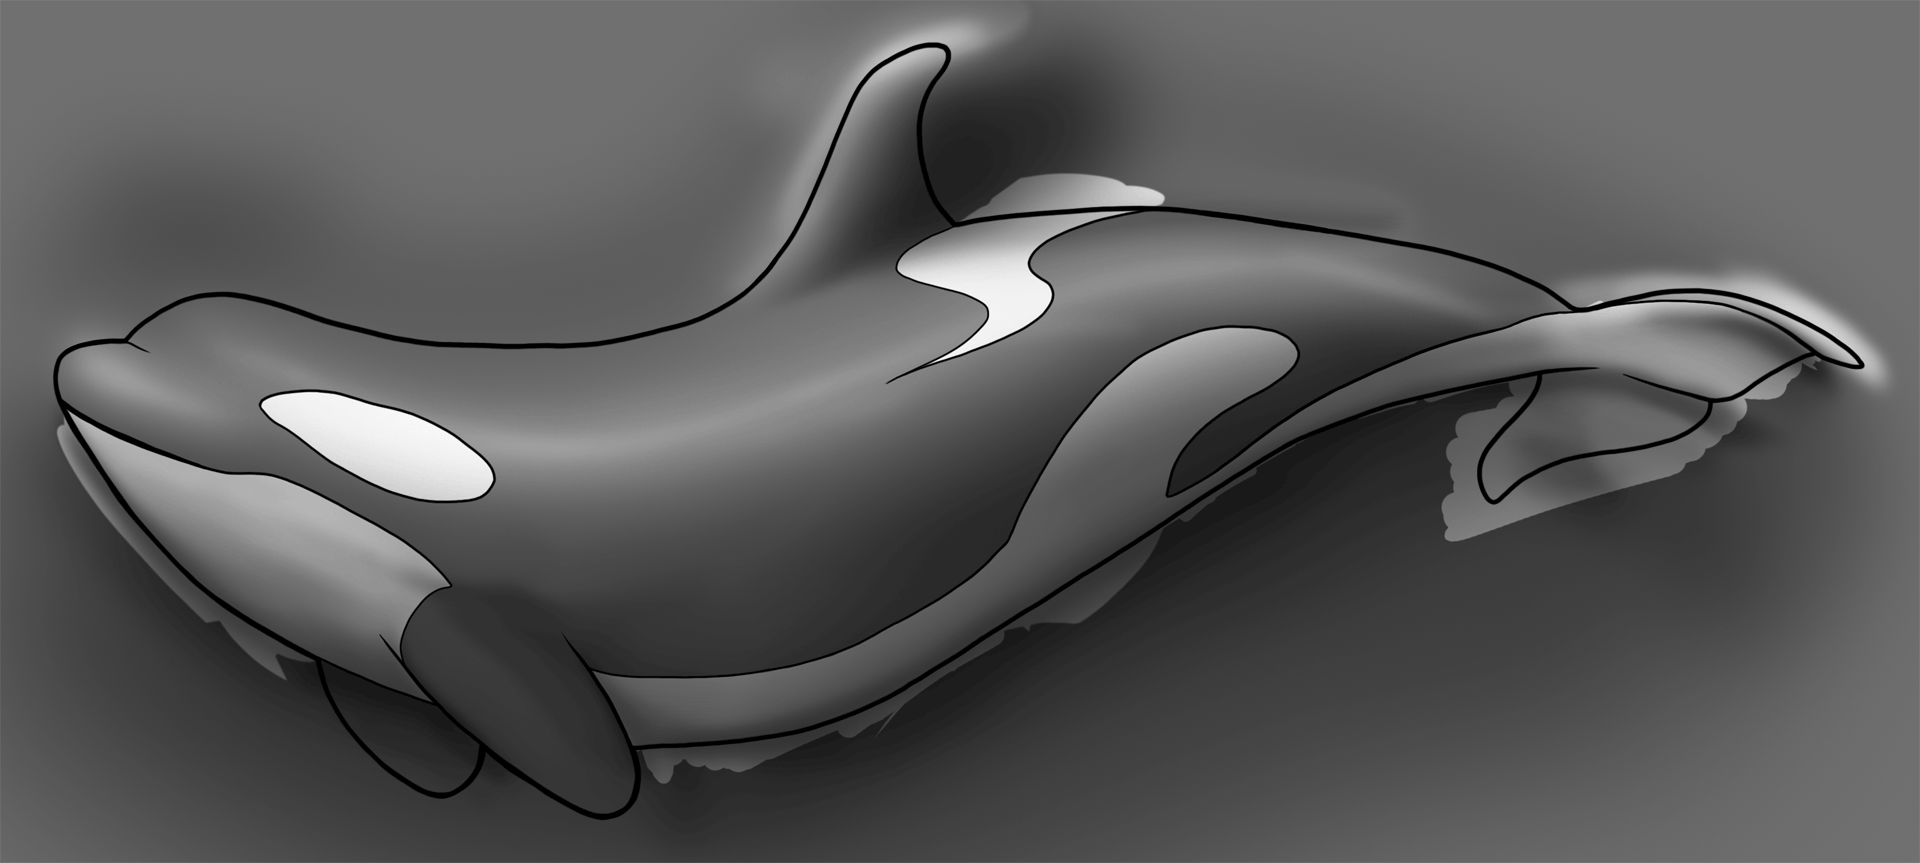 Orca-mask-example-1